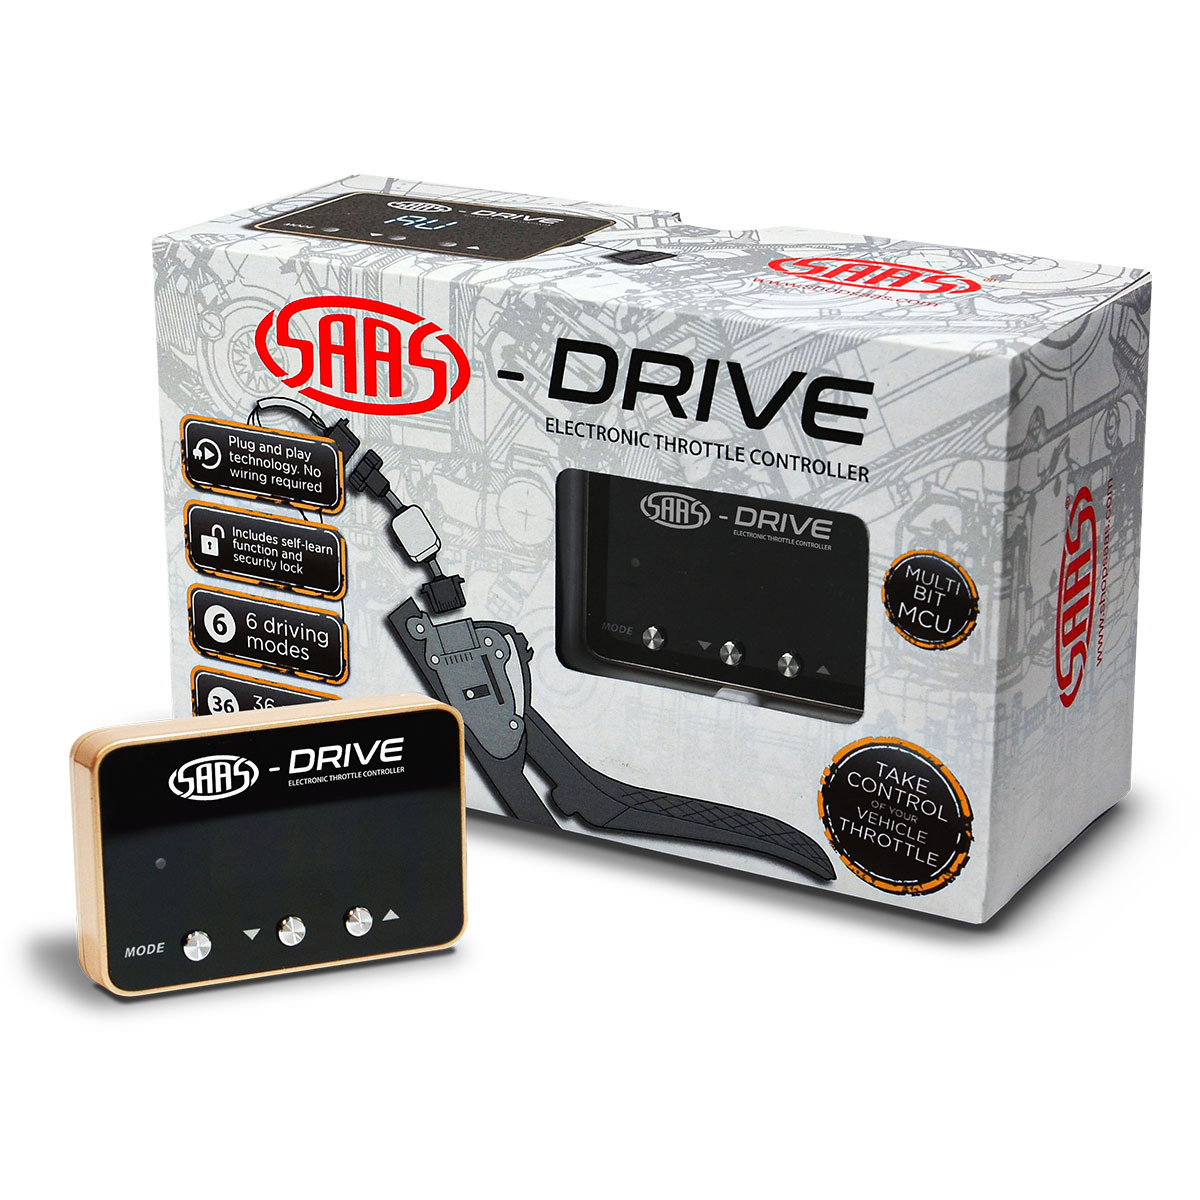 SAAS-Drive Ford Ranger RA/T6 2022 > Throttle Controller